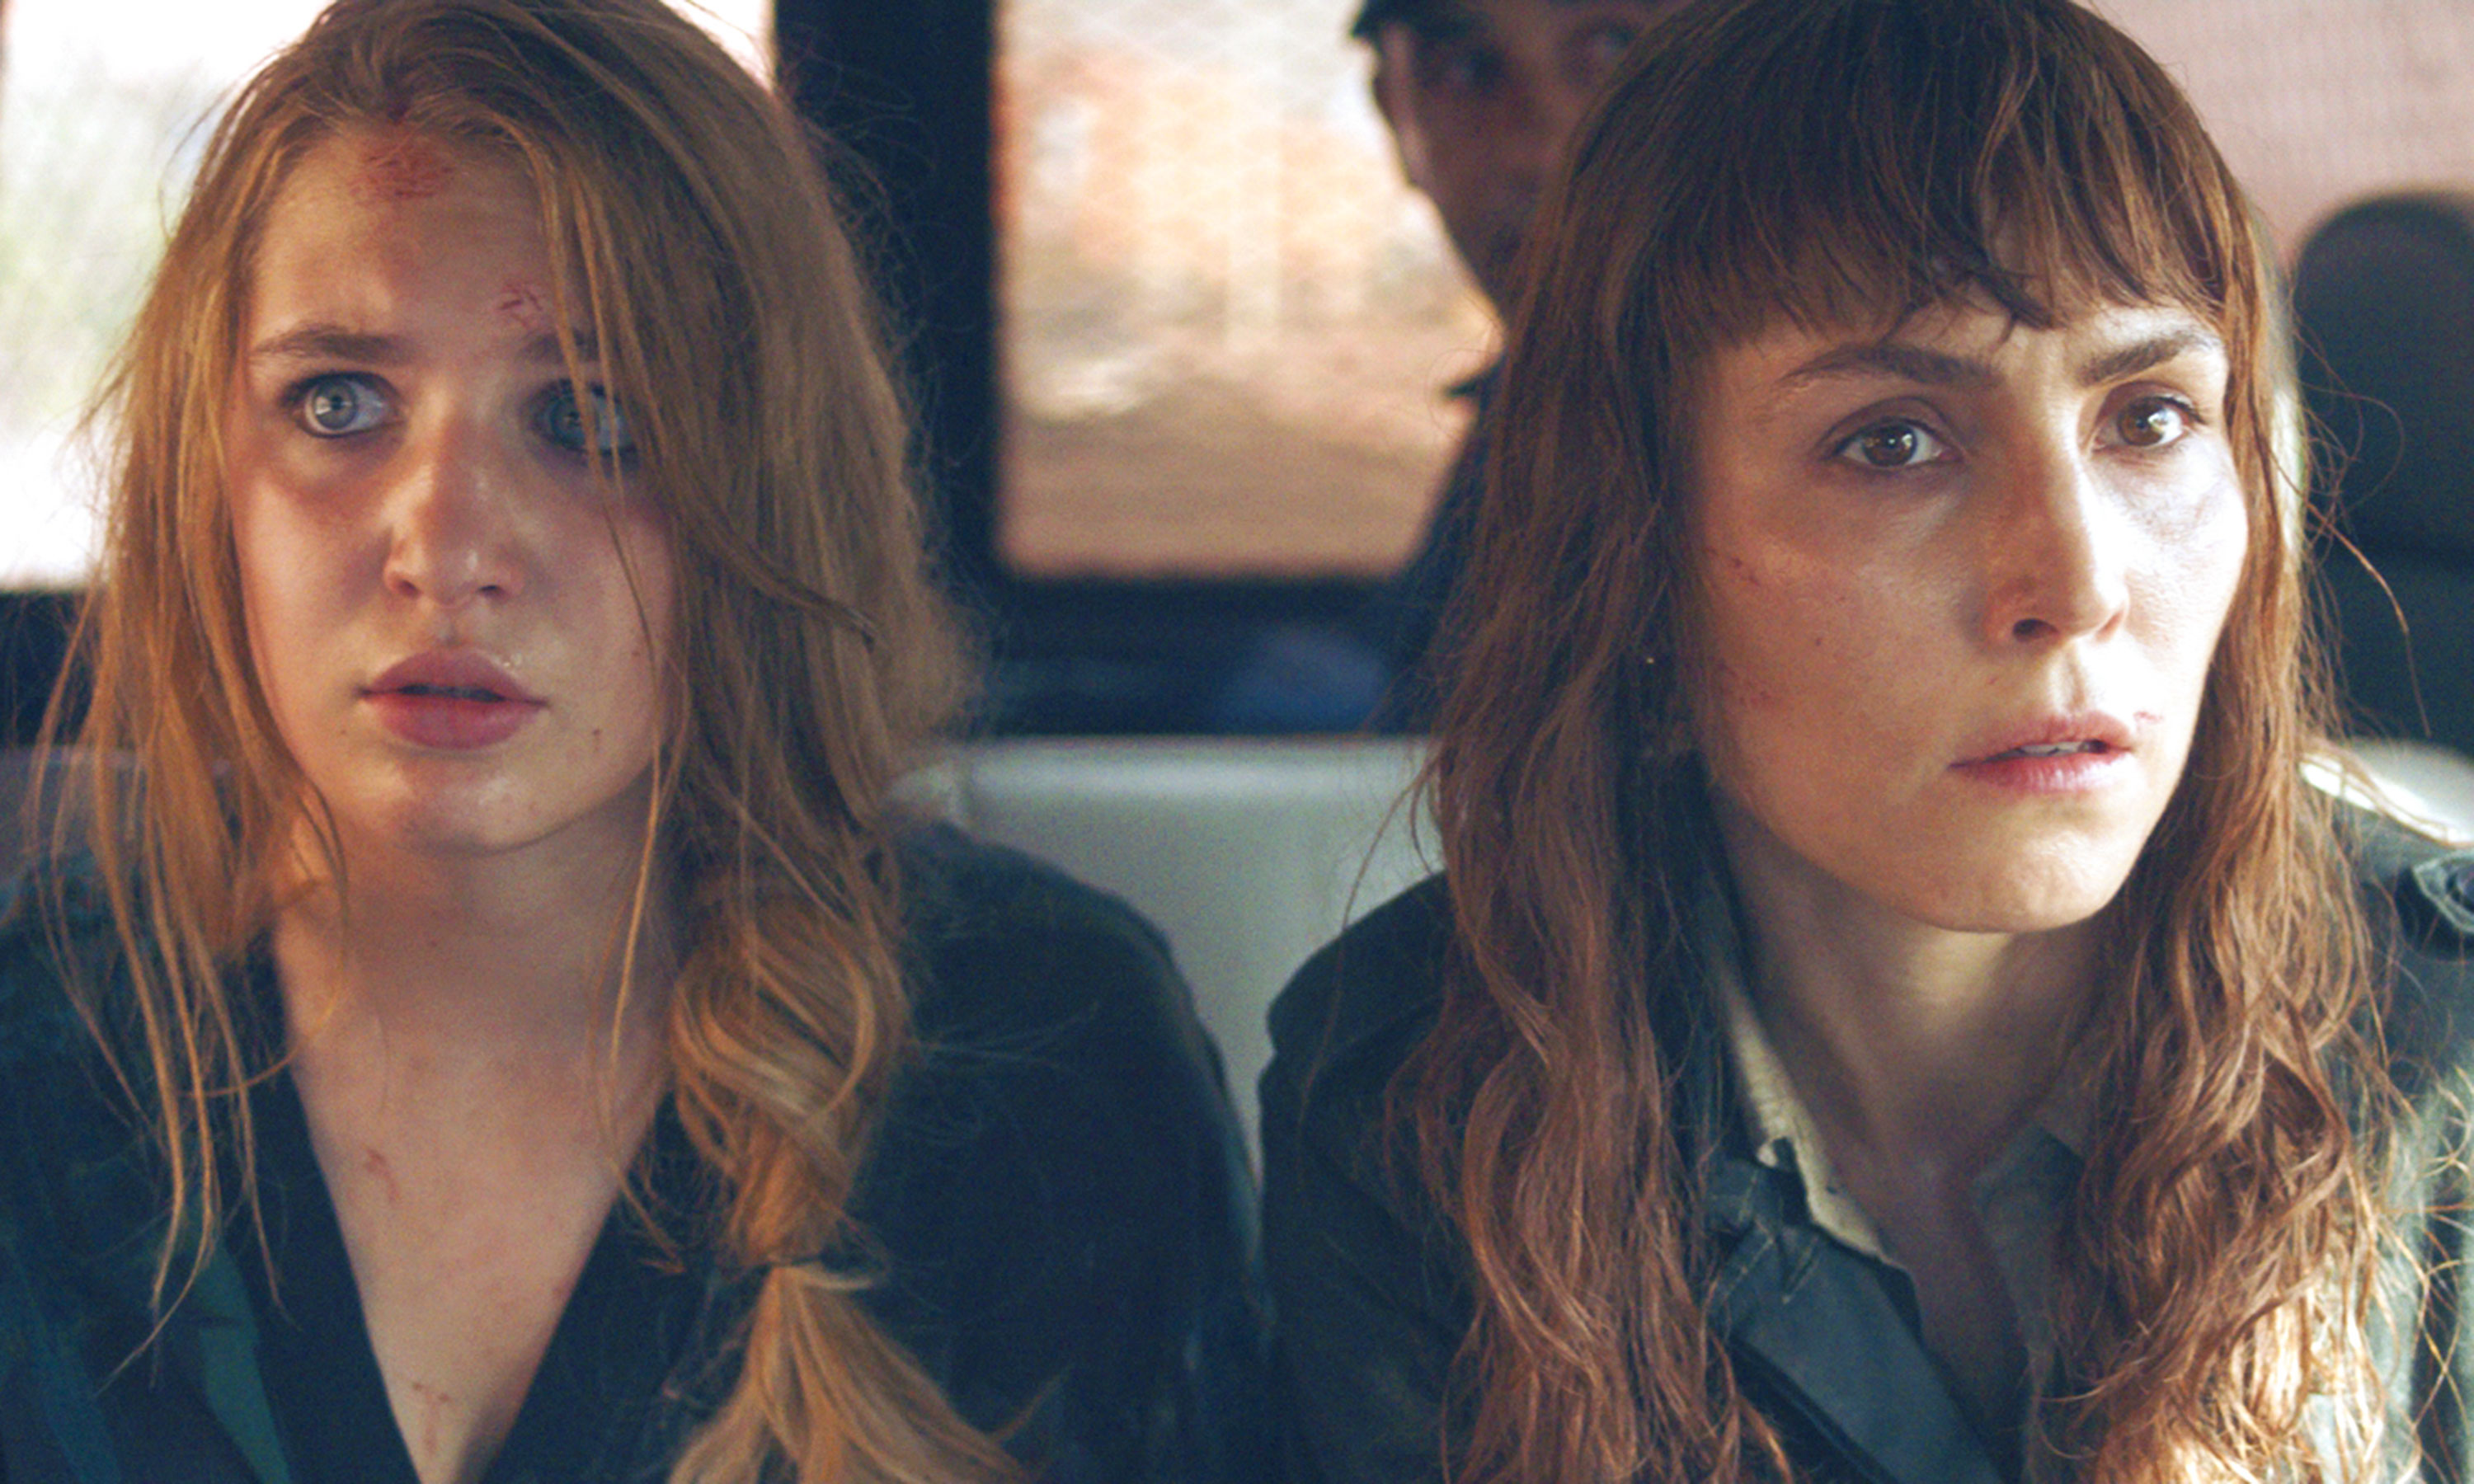 Sophie Nélisse as Zoe Tanner and Noomi Rapace as Sam Carlson in Close, directed by Vicky Jewson.